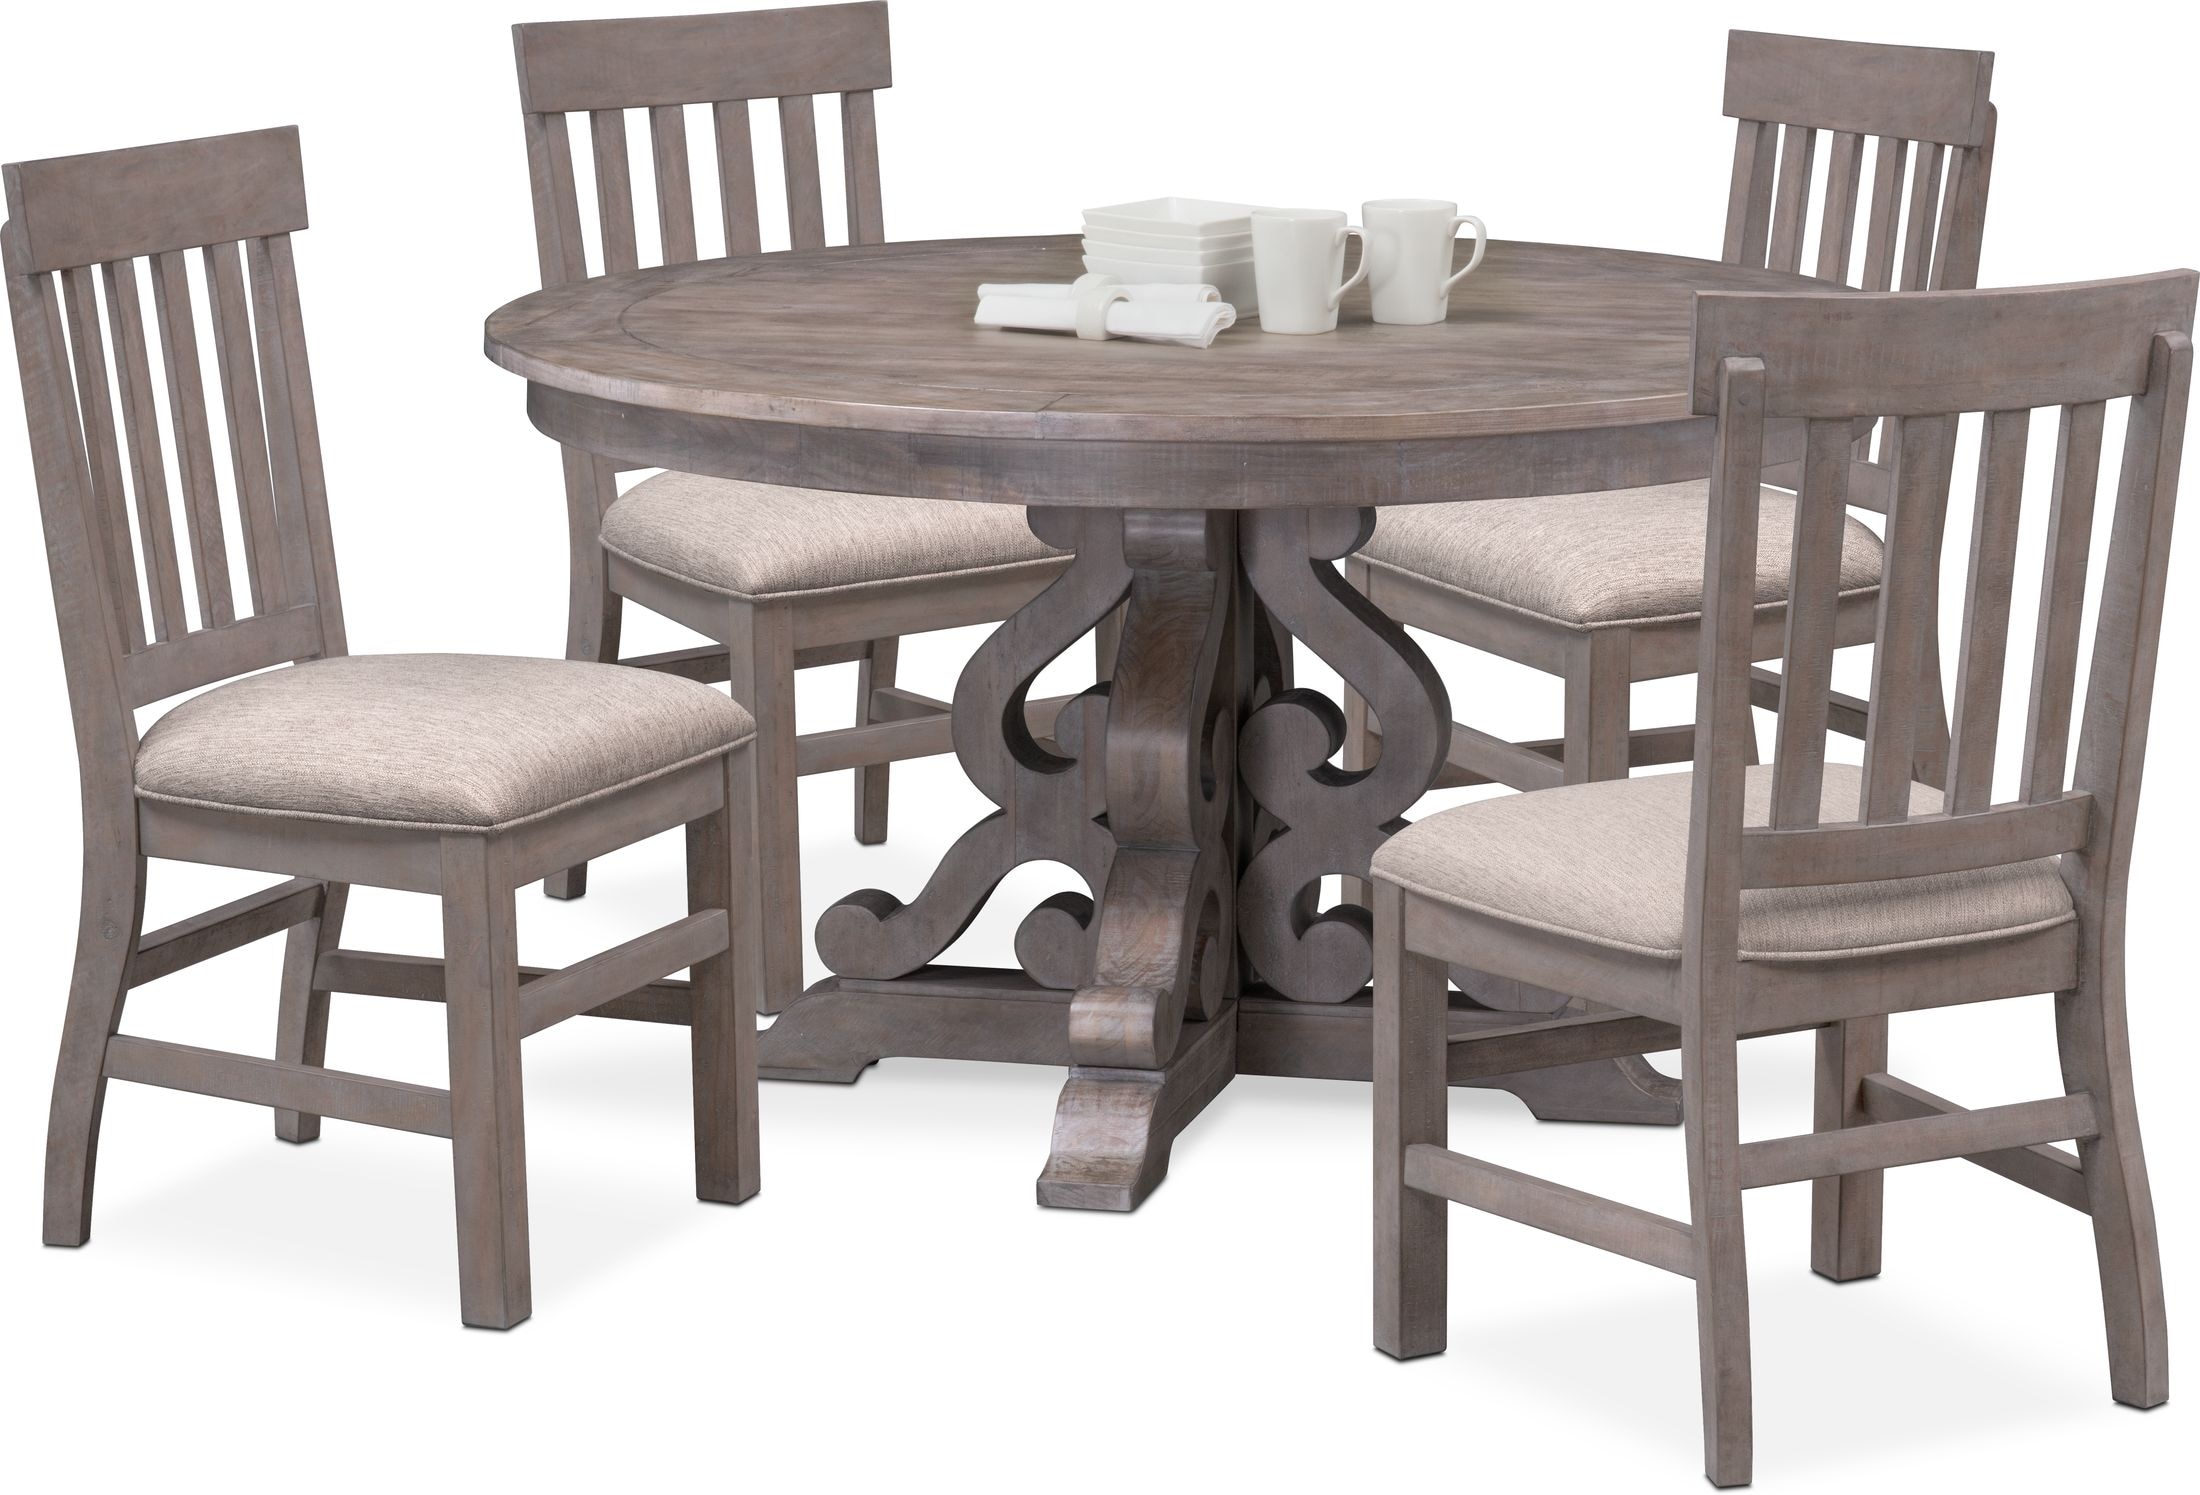 Charthouse Round Dining Table And 4 Side Chairs Value City Furniture